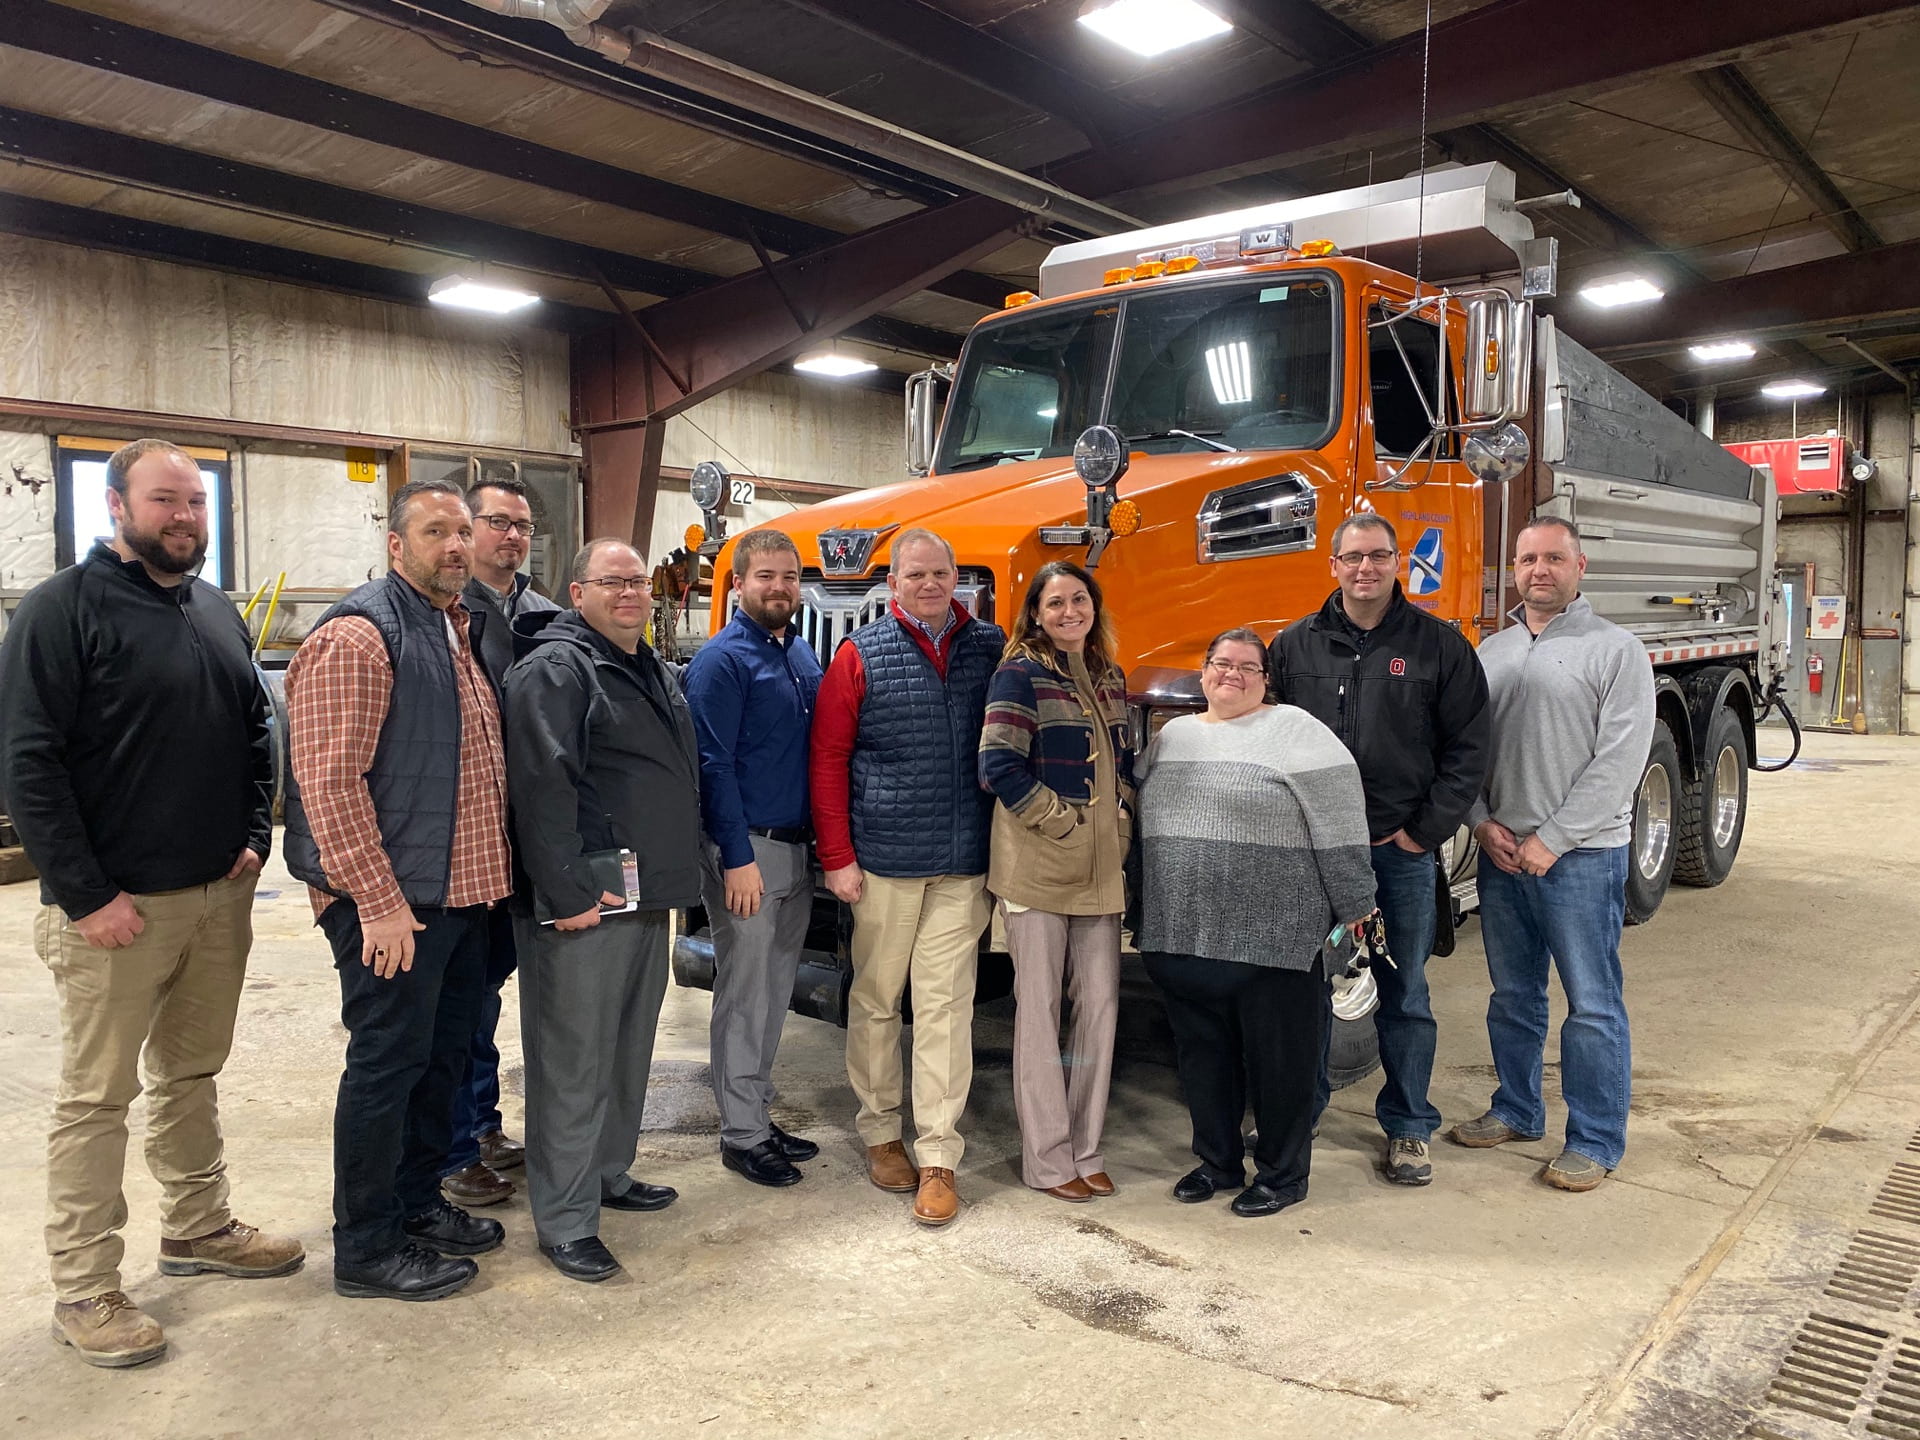 Left to right: Christian Dunlap, Bill Davis, Mel McKenzie, Jim Tomko, Jacob Alexander, Scott Lewis, Courtney Gallimore, Amanda Hall, Blaine Williams, and Highland County Engineer Chris Fauber in the shop at the Engineer’s Office. 